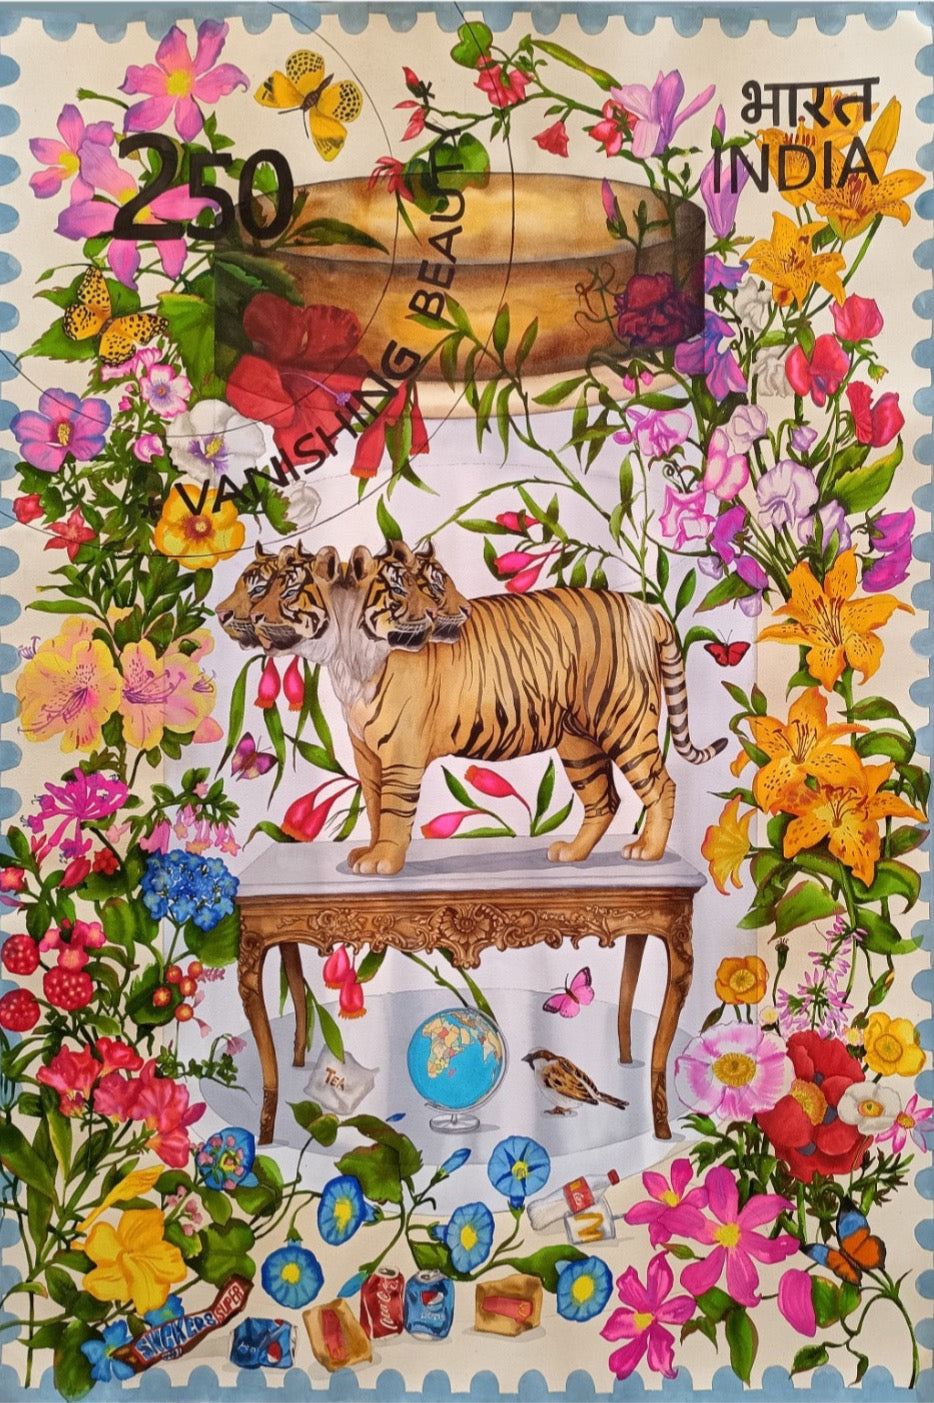 A four faced tiger finds itself in a glass jar surrounded by a floral fantasy garden. Manisha Agrawal paints a whimsical world using watercolor and tea stain on paper.